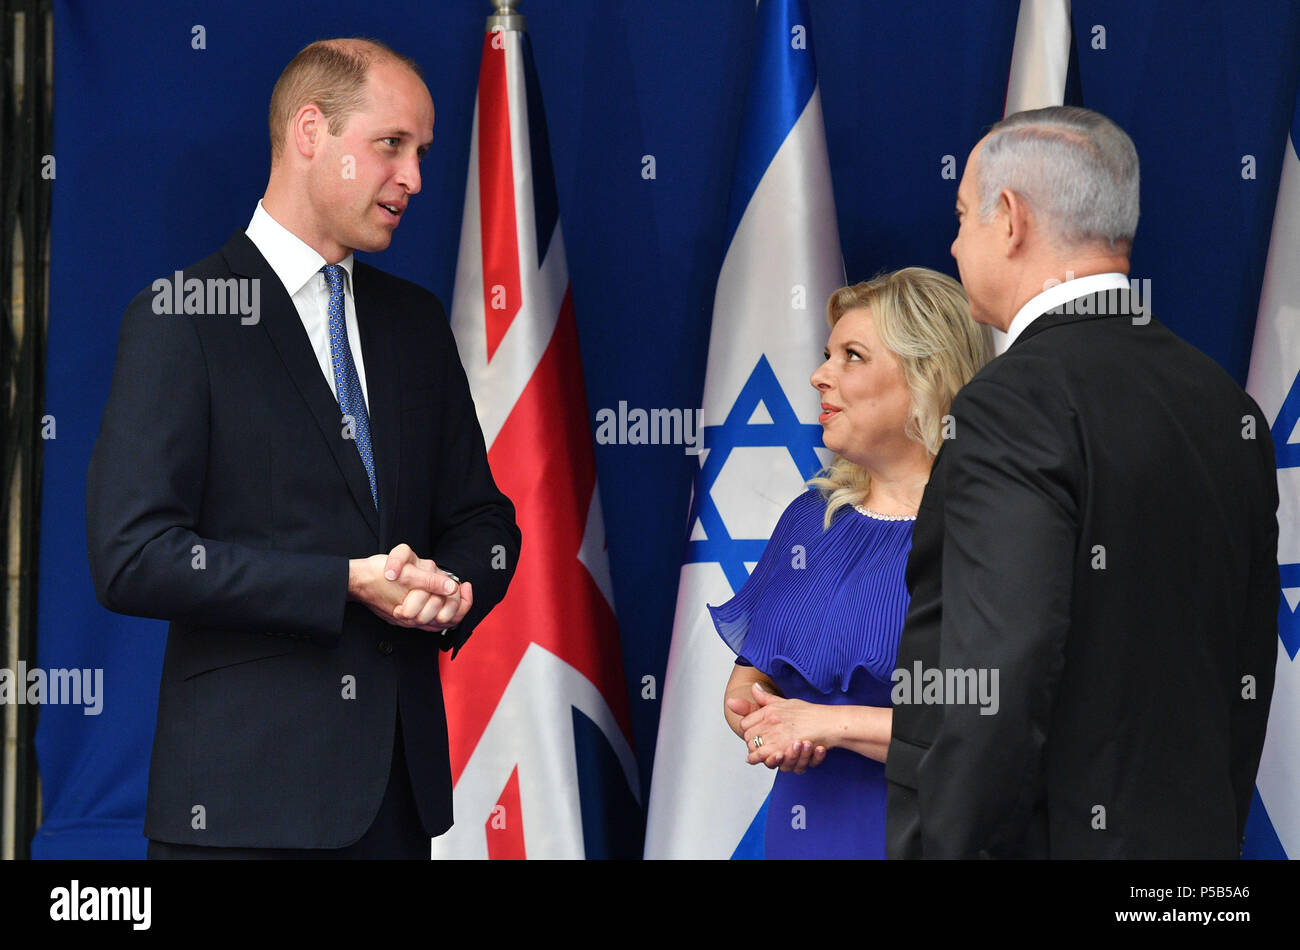 The Duke of Cambridge meets with Israeli Prime Minister Benjamin Netanyahu and his wife Sara Ben-Artzi at his official residence in Jerusalem, Israel, as part of his tour of the Middle East. Stock Photo